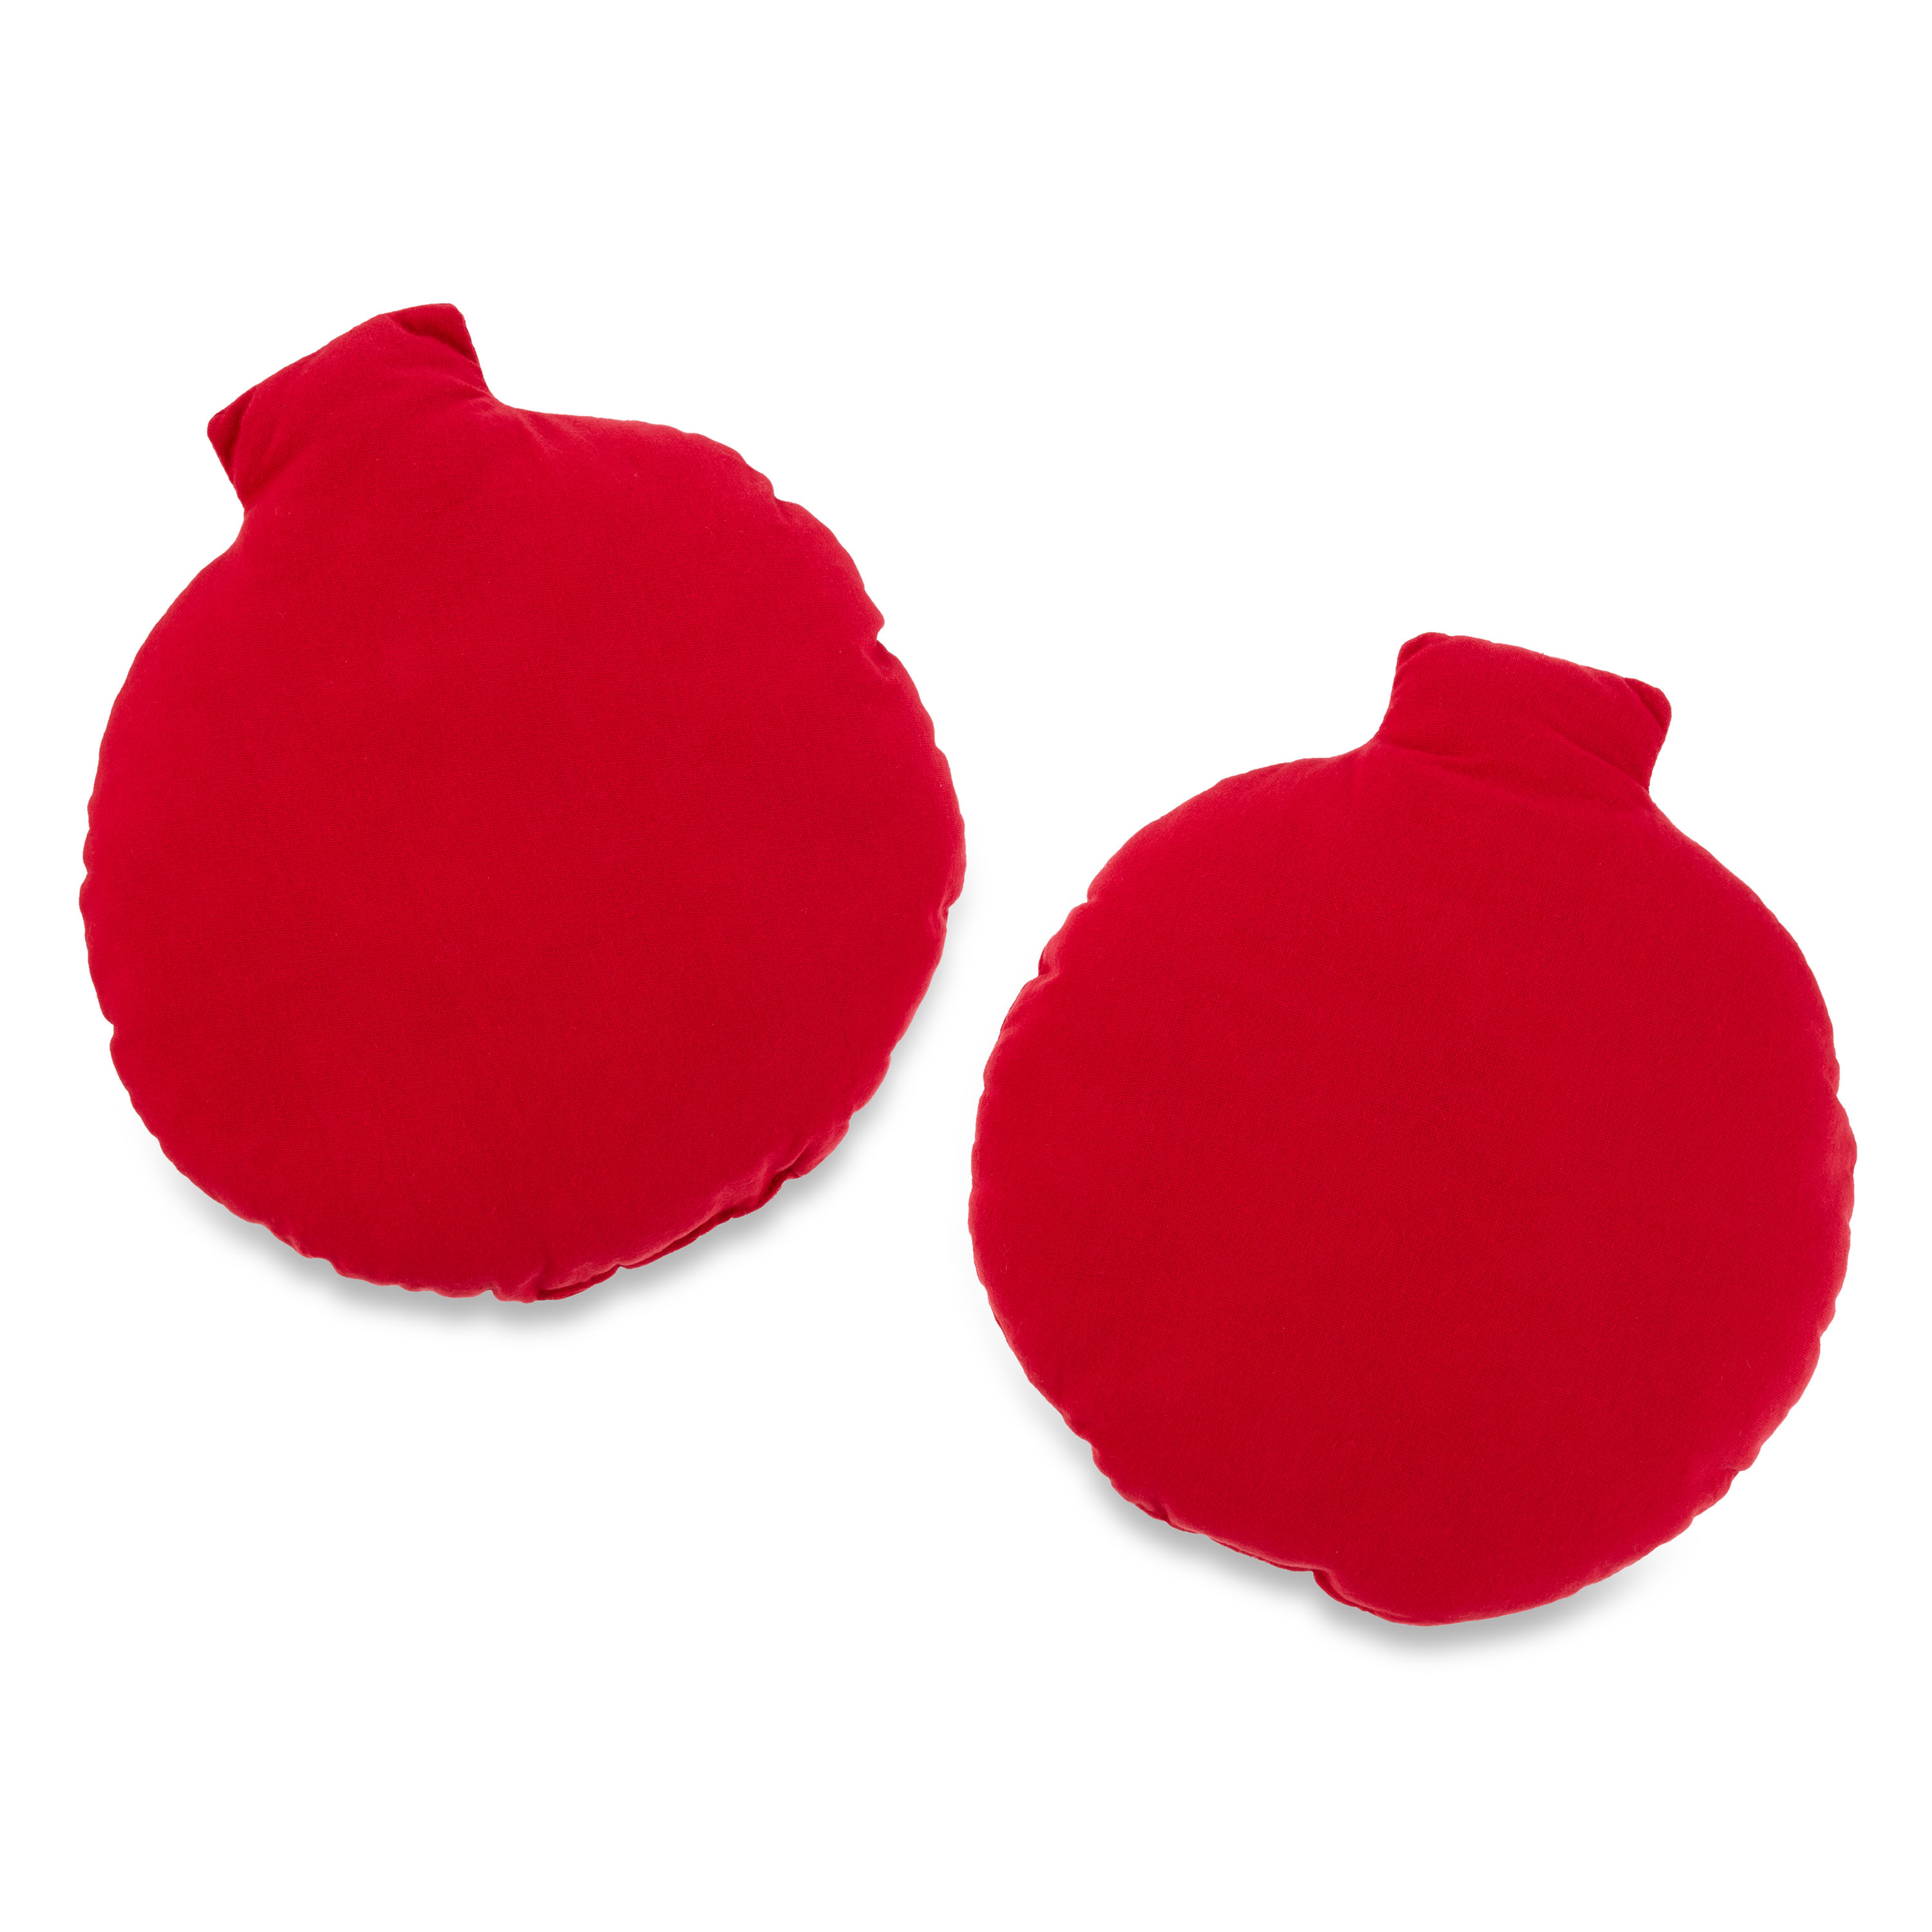 Holiday Time Christmas 13 inch Red Ornament Decorative Pillows Plush, 2-pack - image 5 of 6